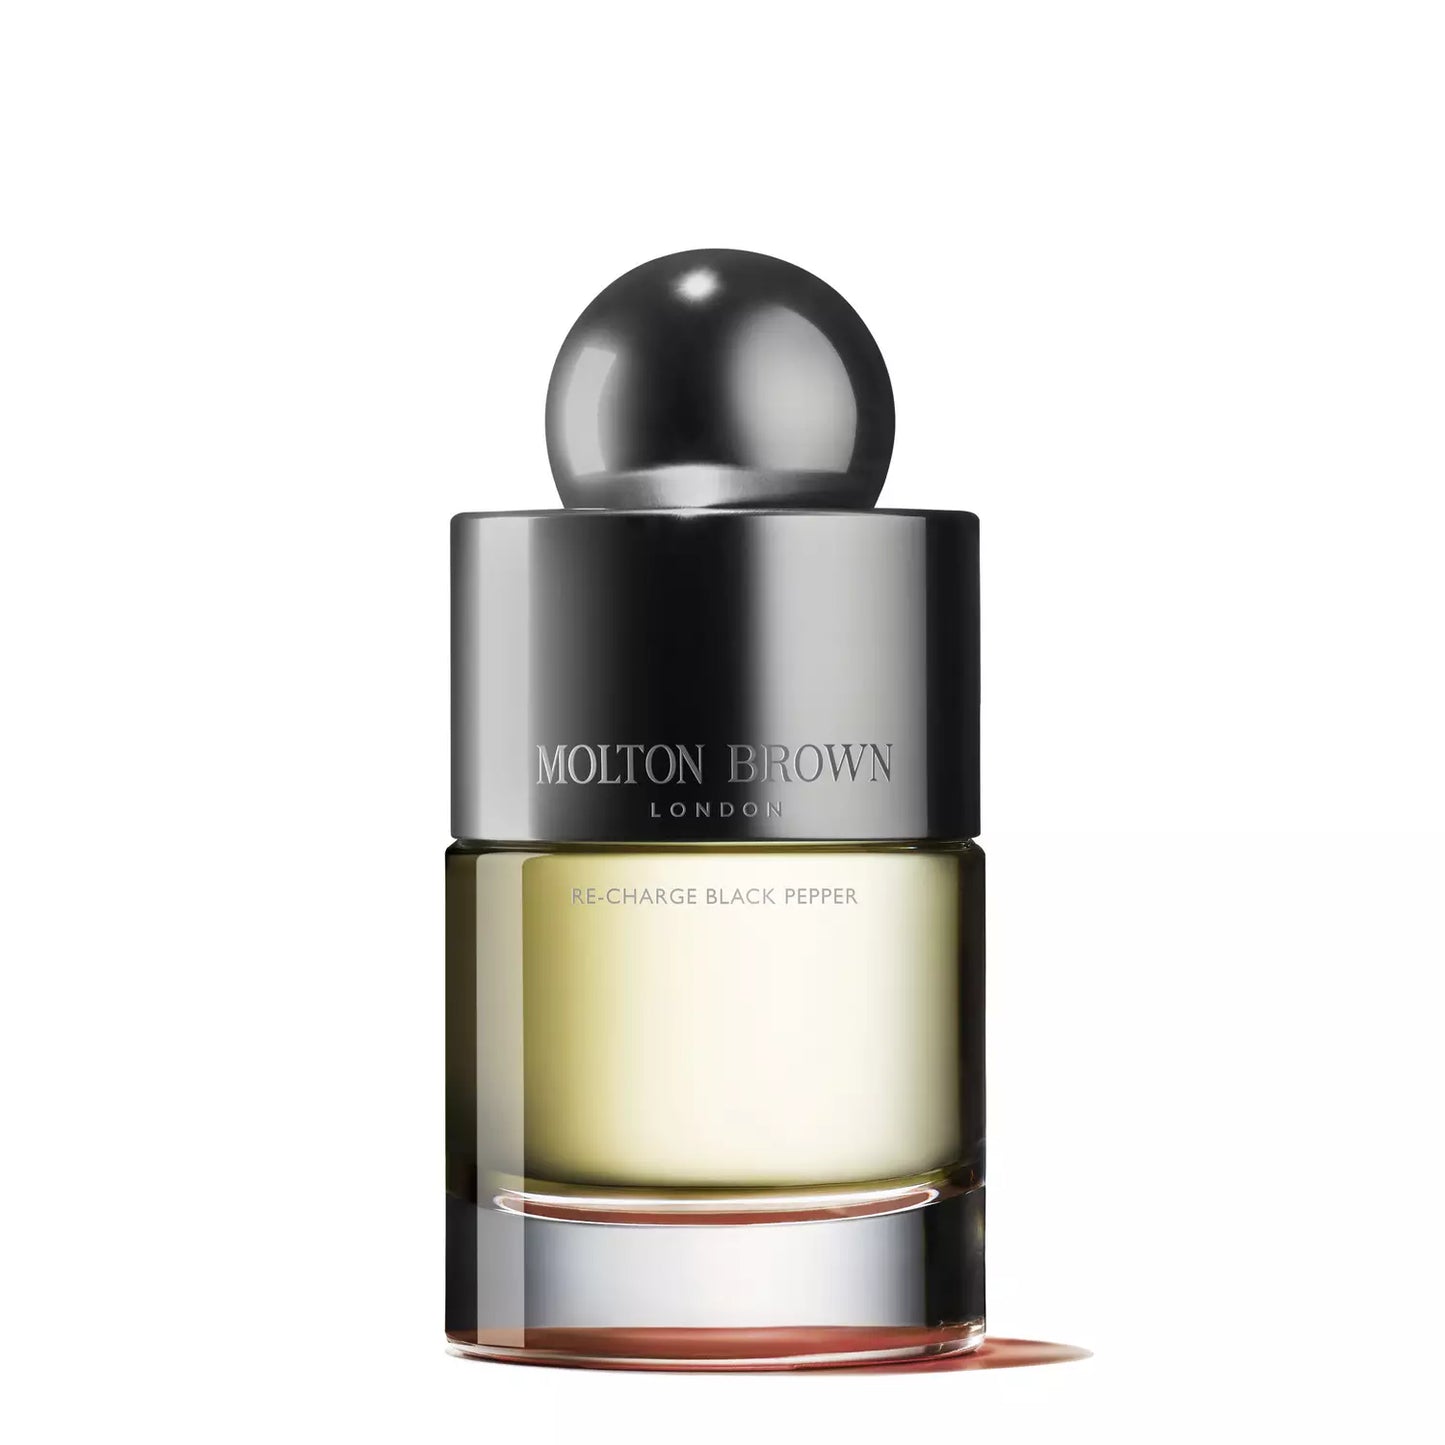 Re-charge Black Pepper Parfume